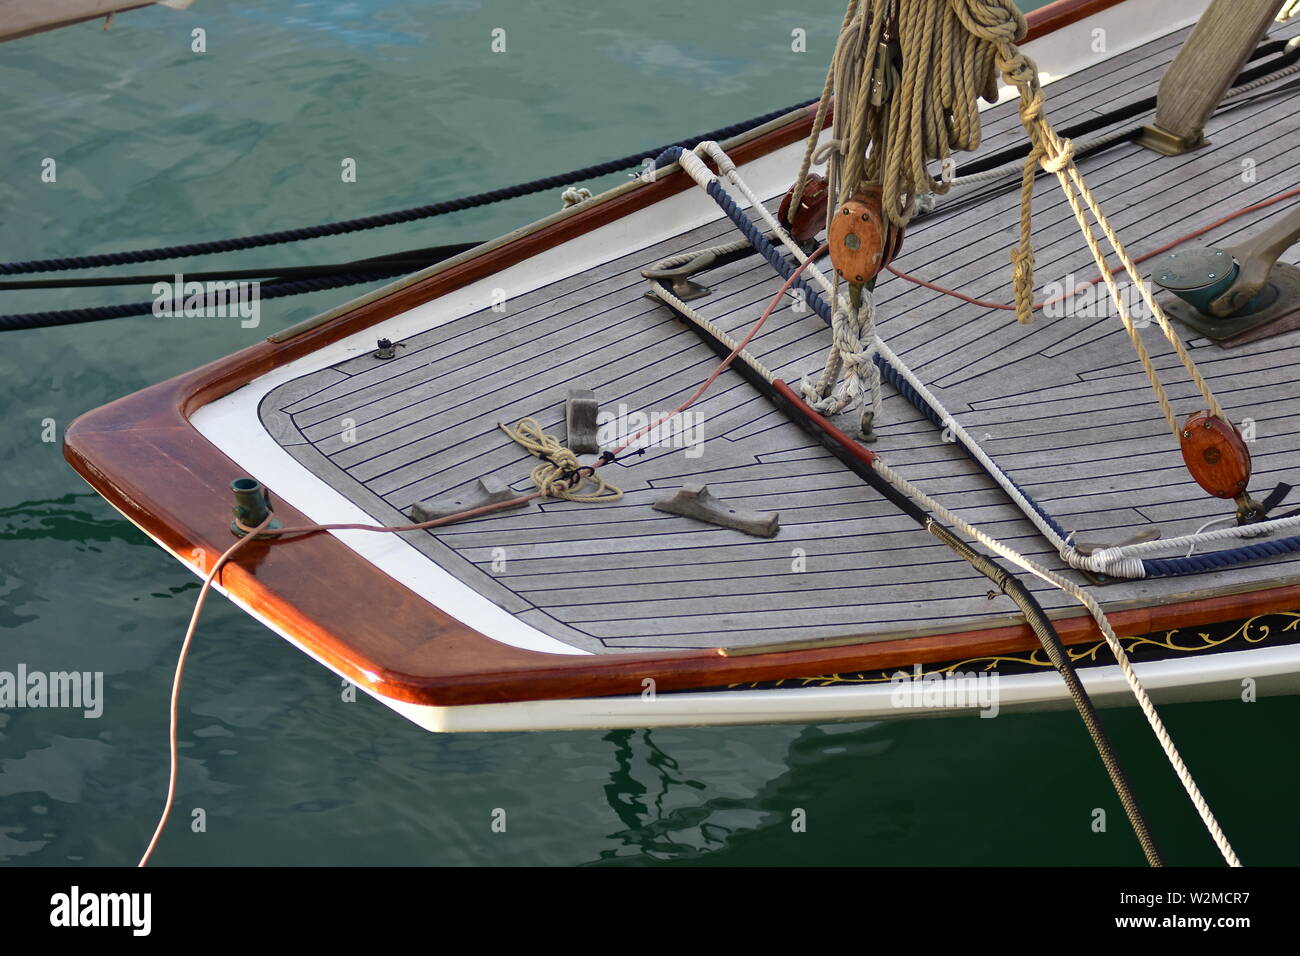 Stern of vintage wooden yacht with teak deck and classic wooden blocks and natural fiber ropes. Stock Photo